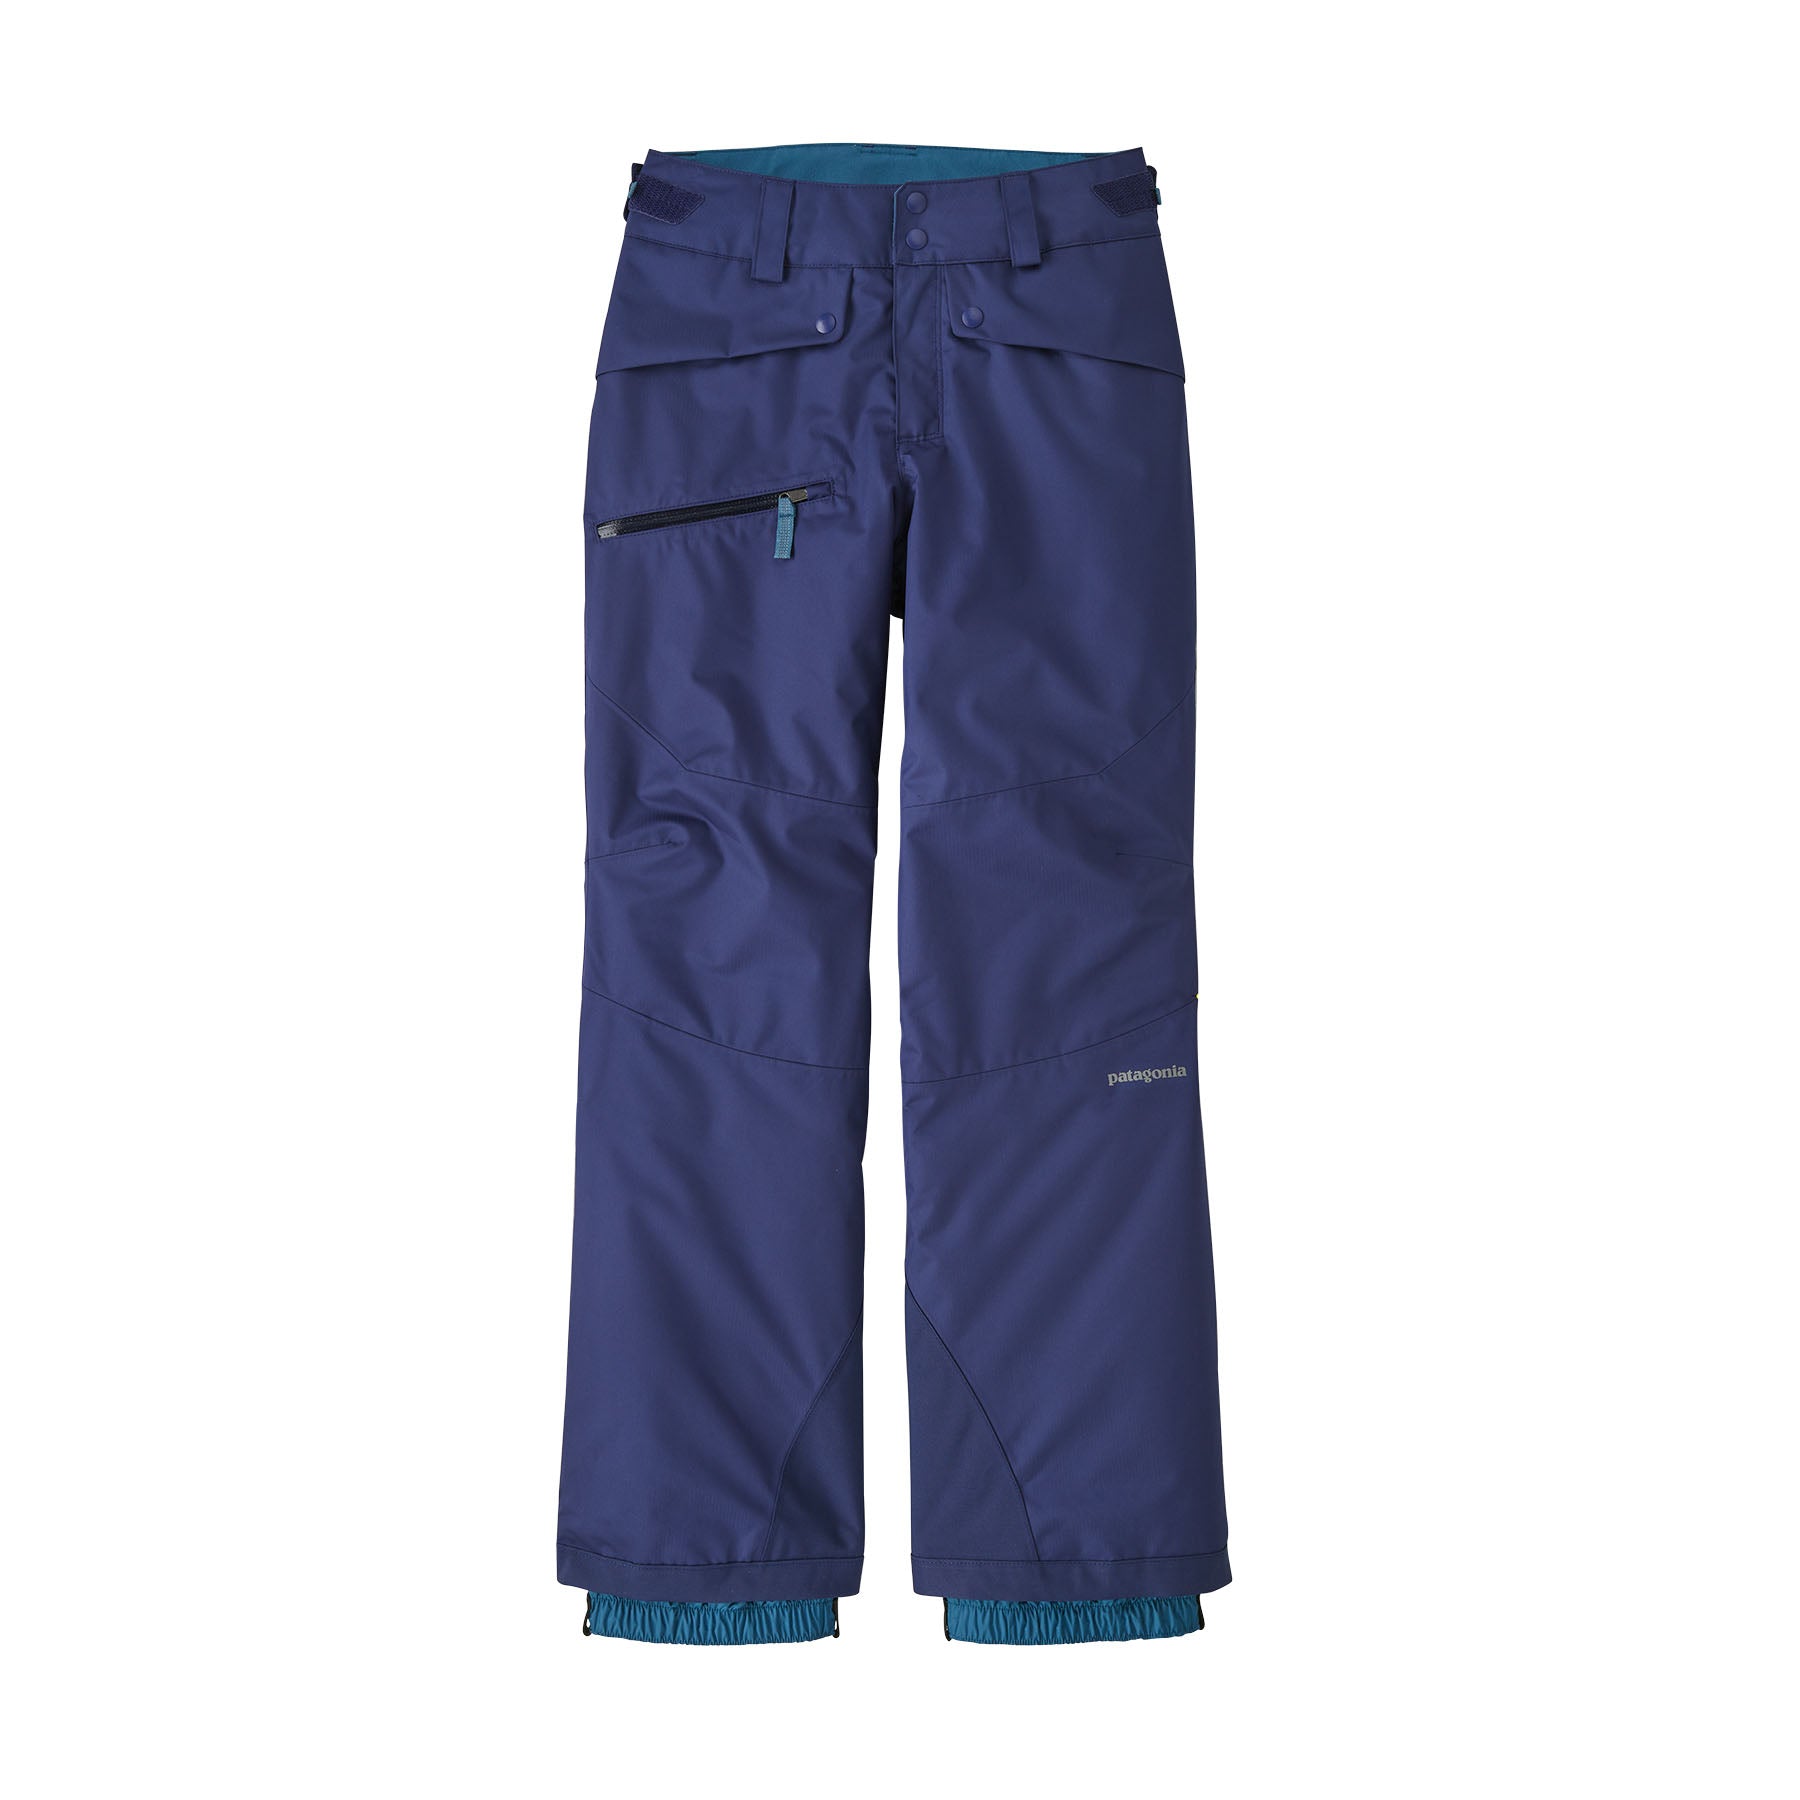 Patagonia Blue Active Pants Size XL - 67% off